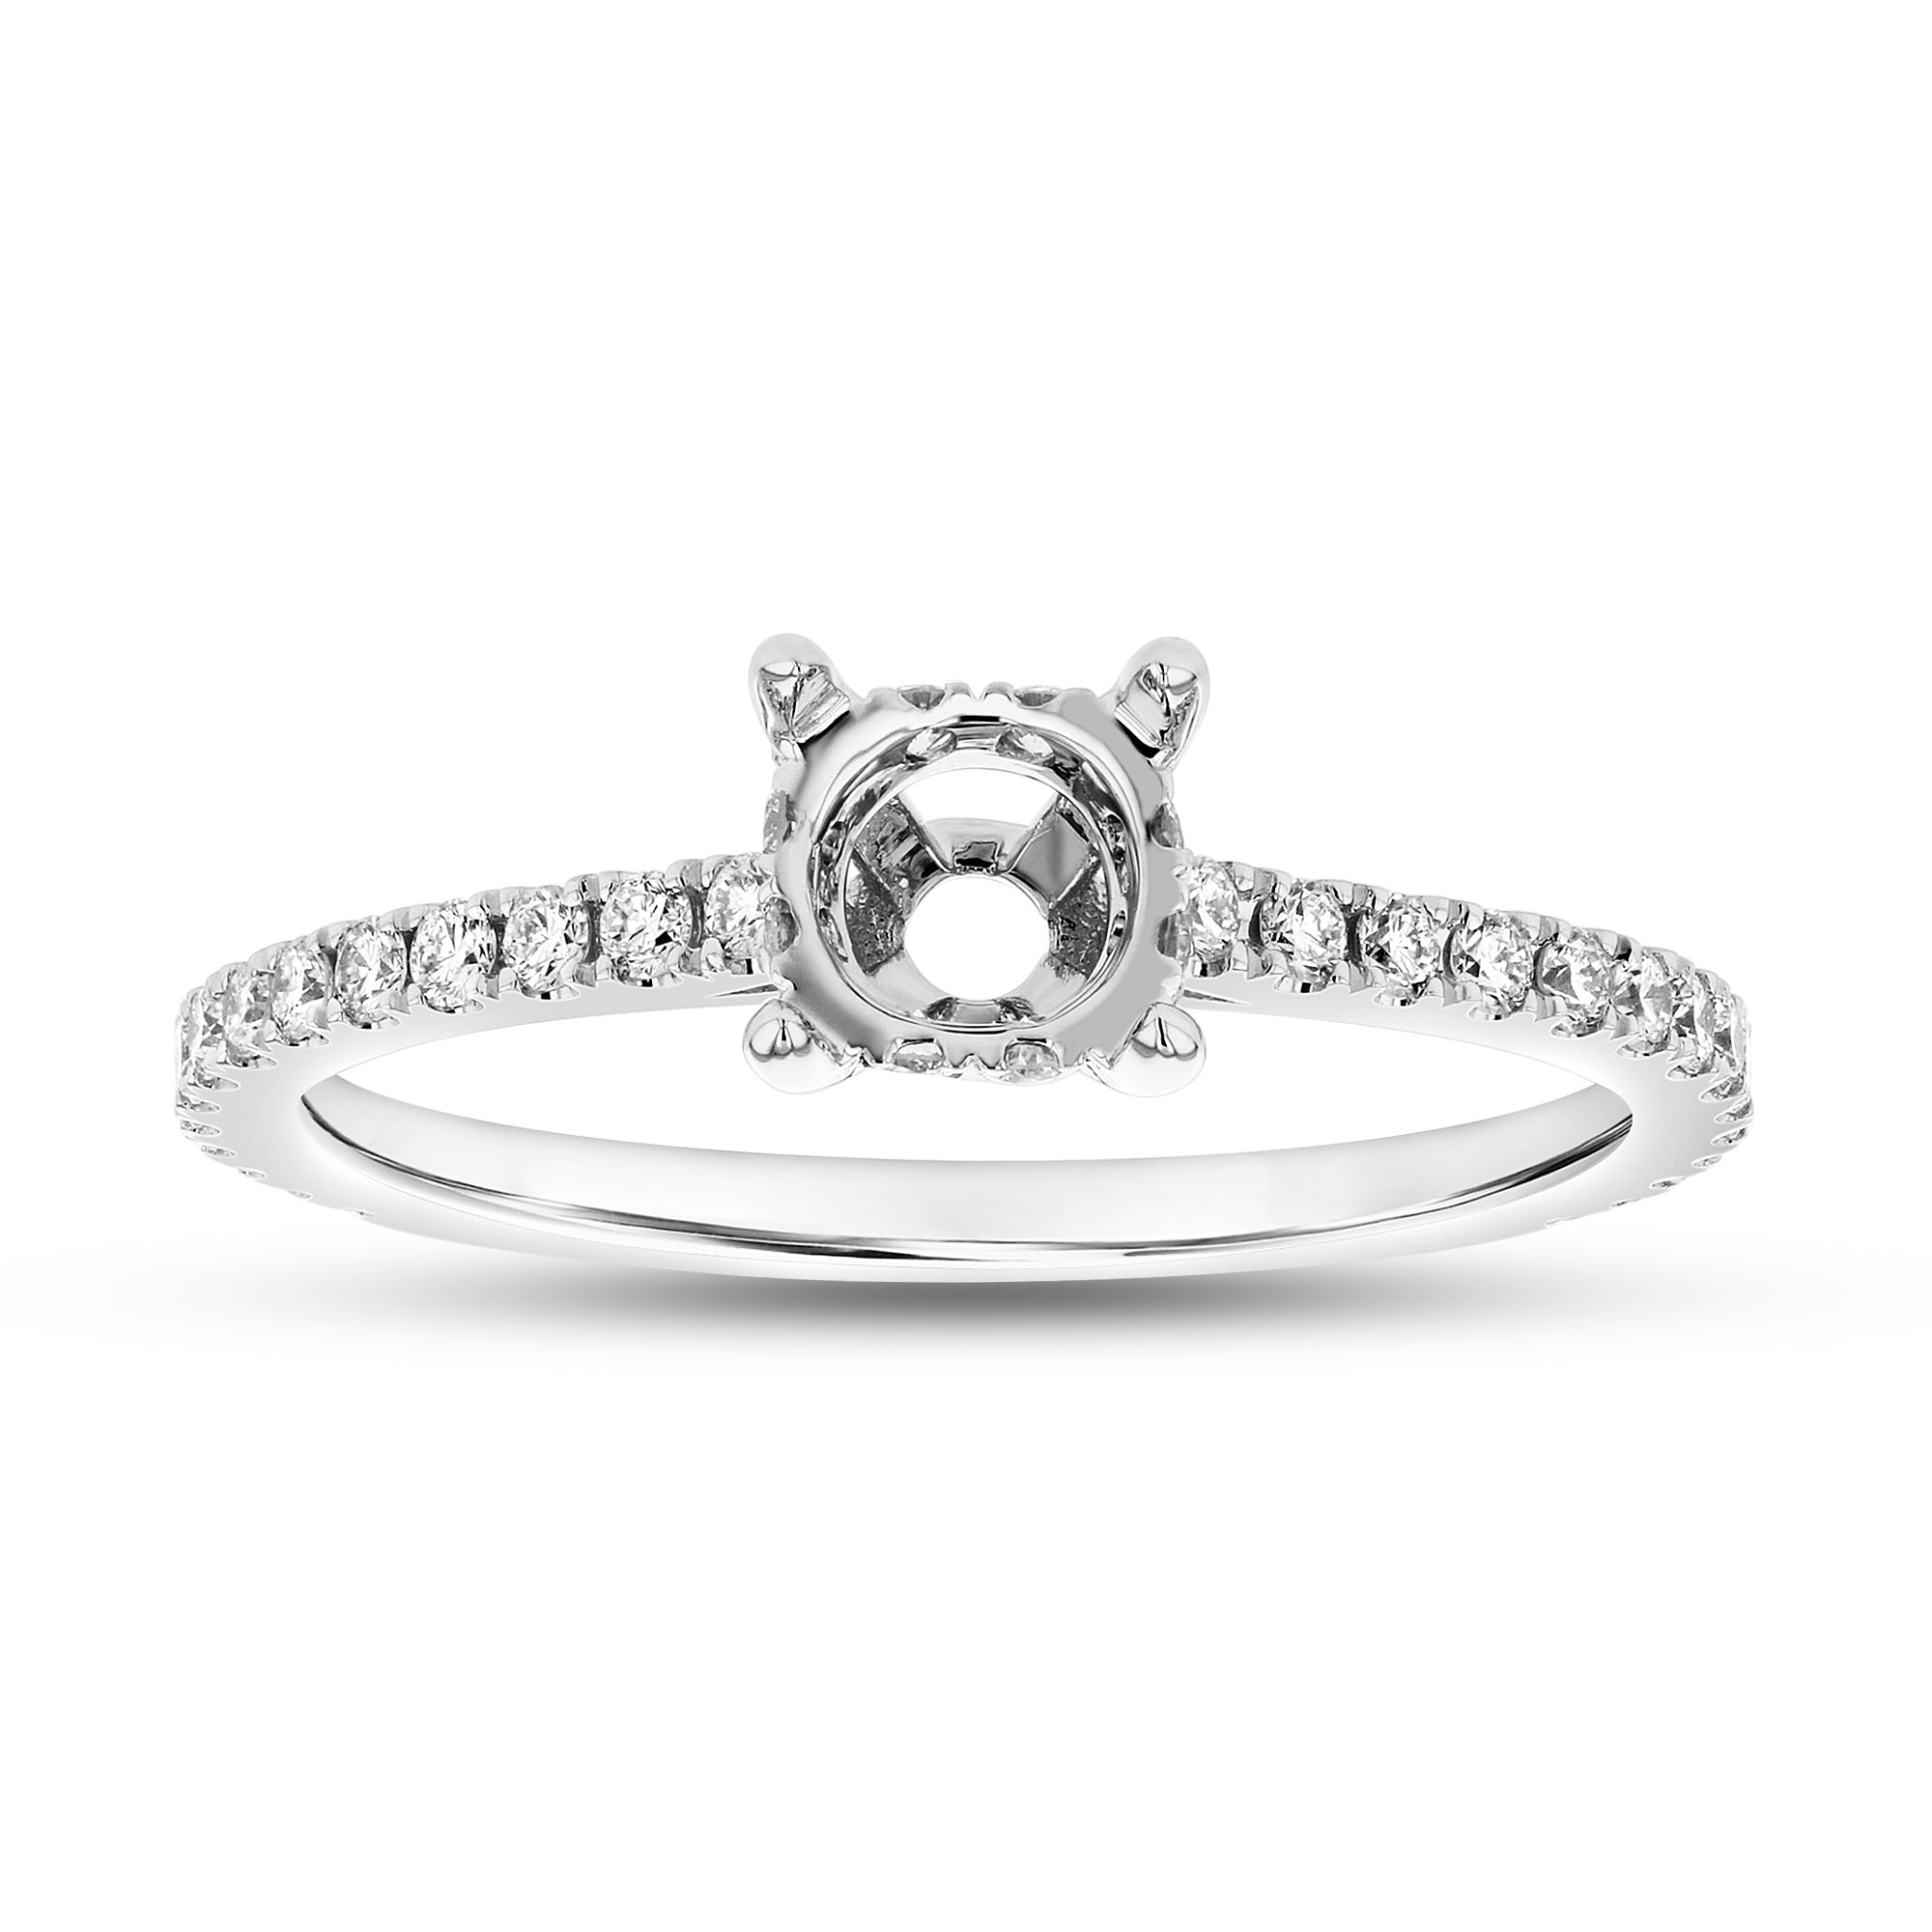 View 0.37ctw Diamond Under Halo Semi Mount Engagement Ring in 14k White Gold